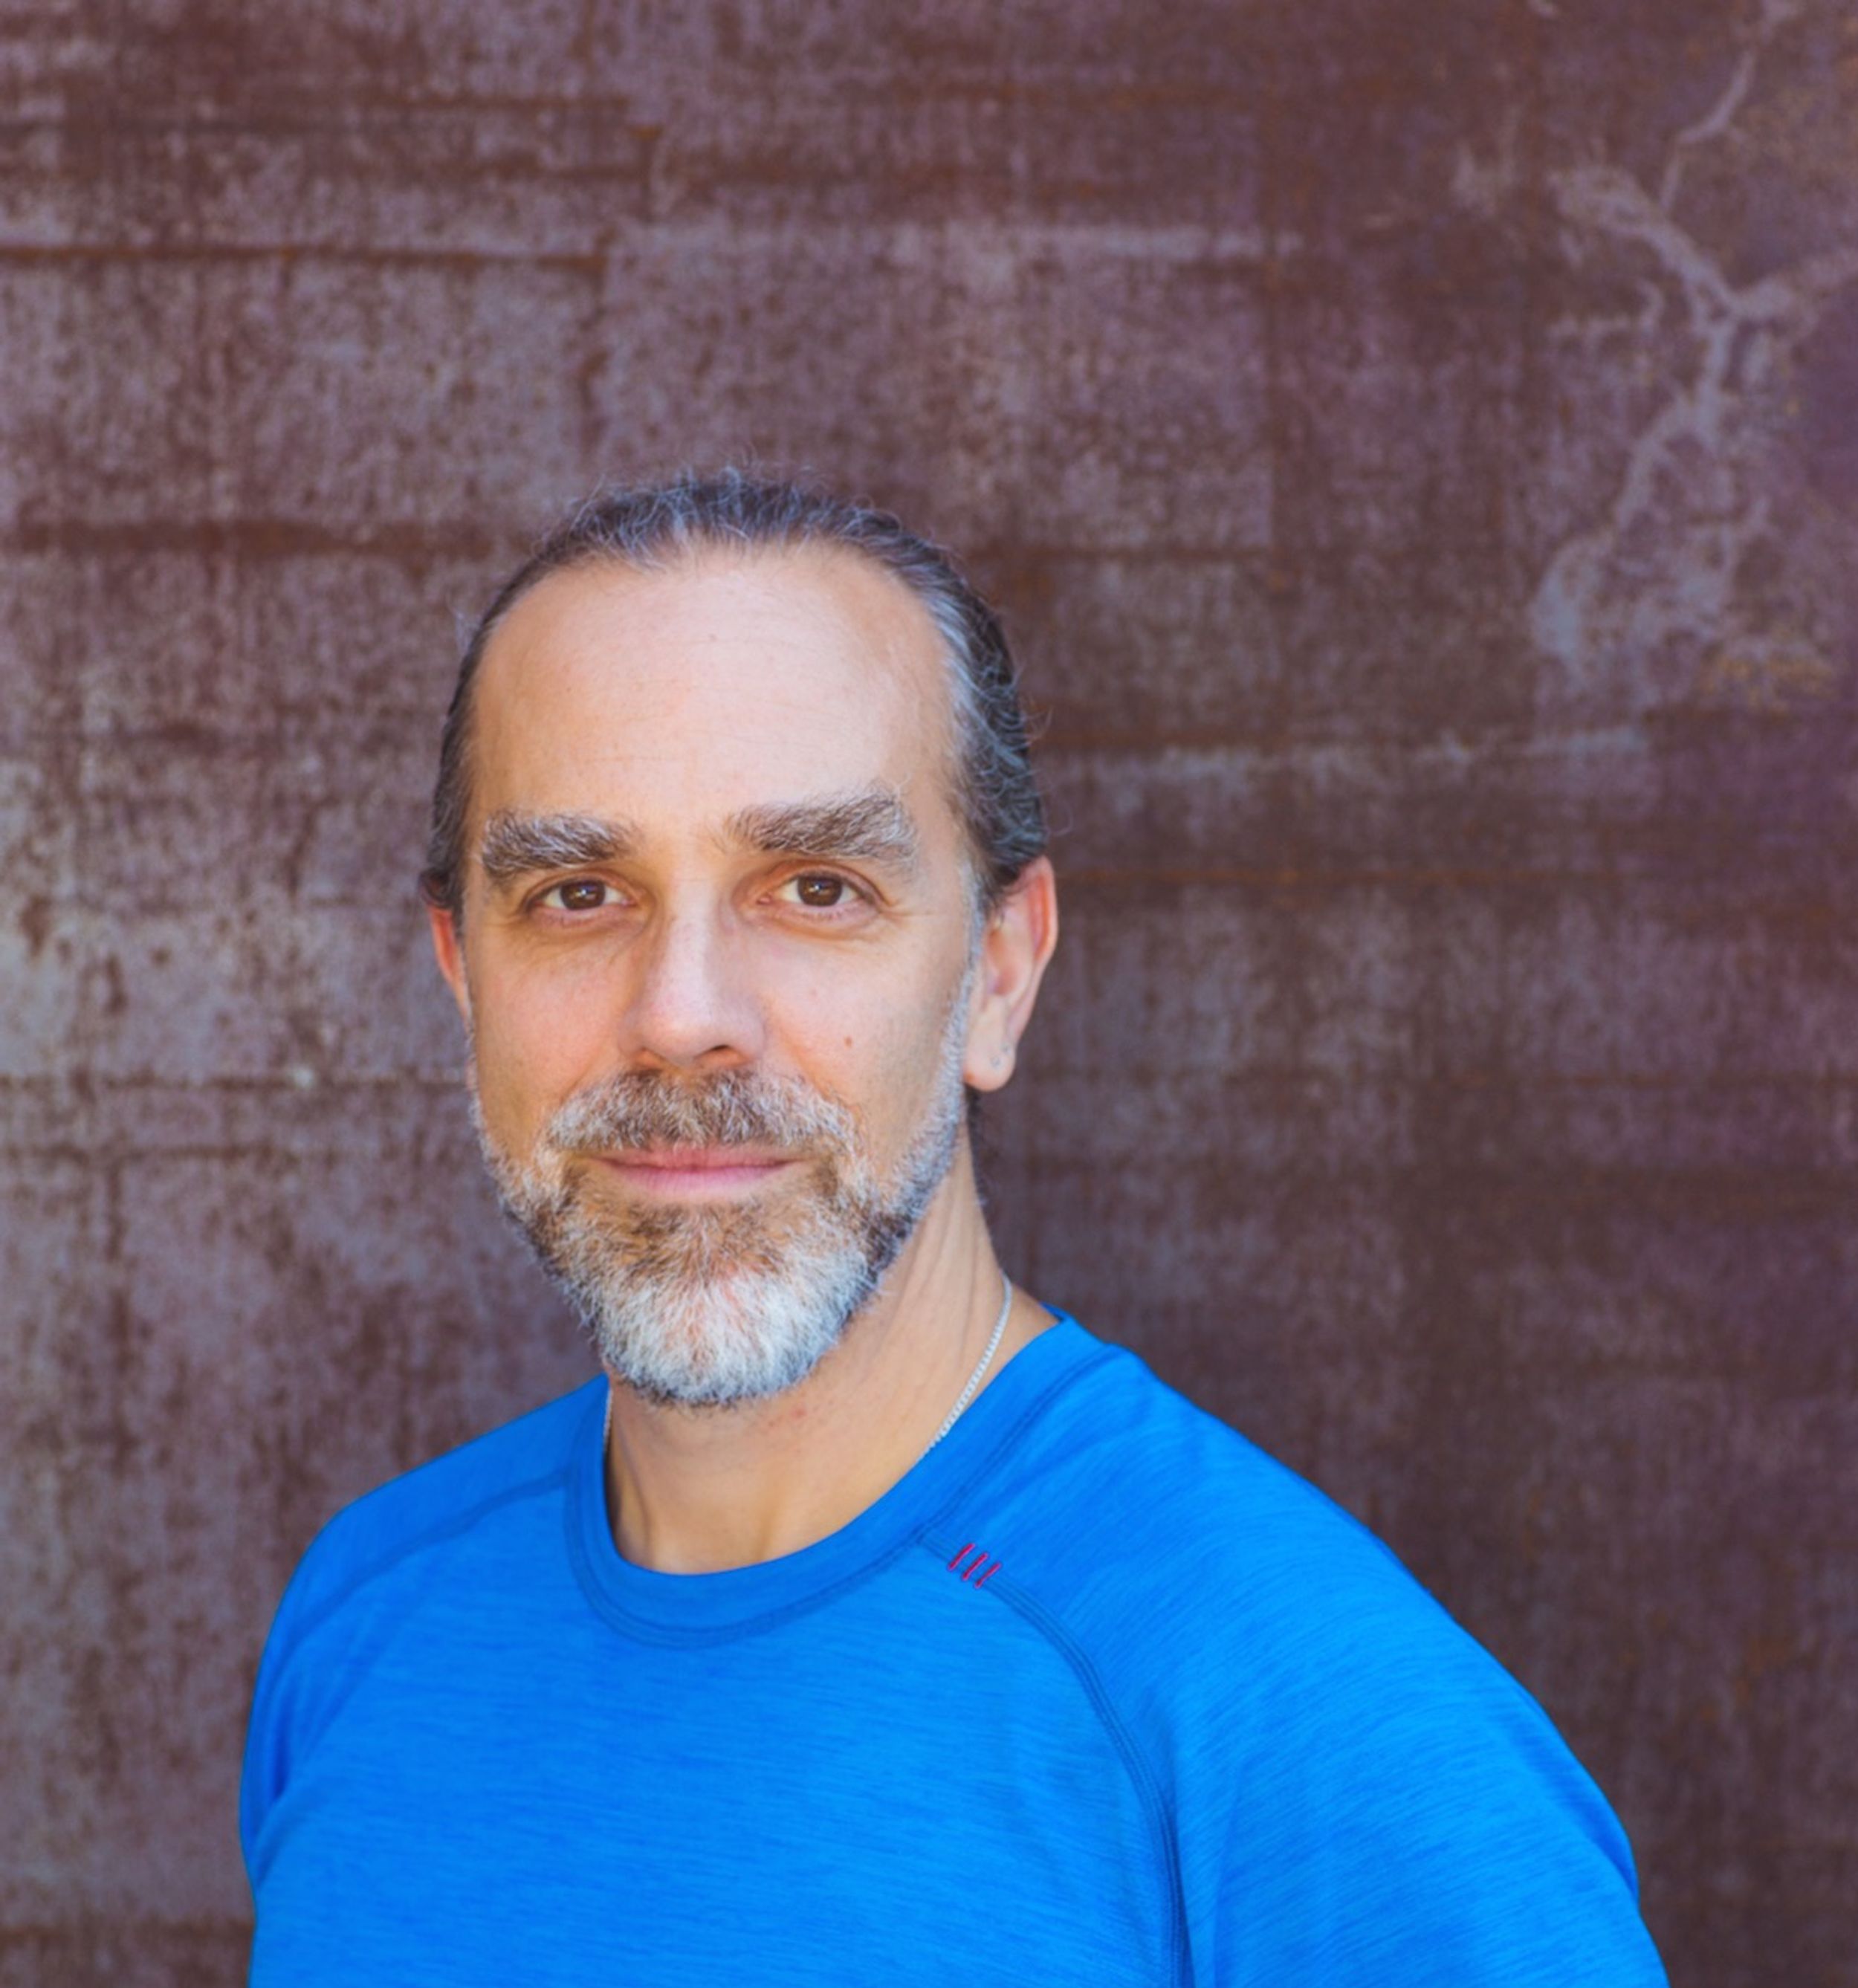 Astro Teller, head of X, Alphabet's innovation lab, leads a group of engineers, inventors, and designers devoted to futuristic moonshot projects.